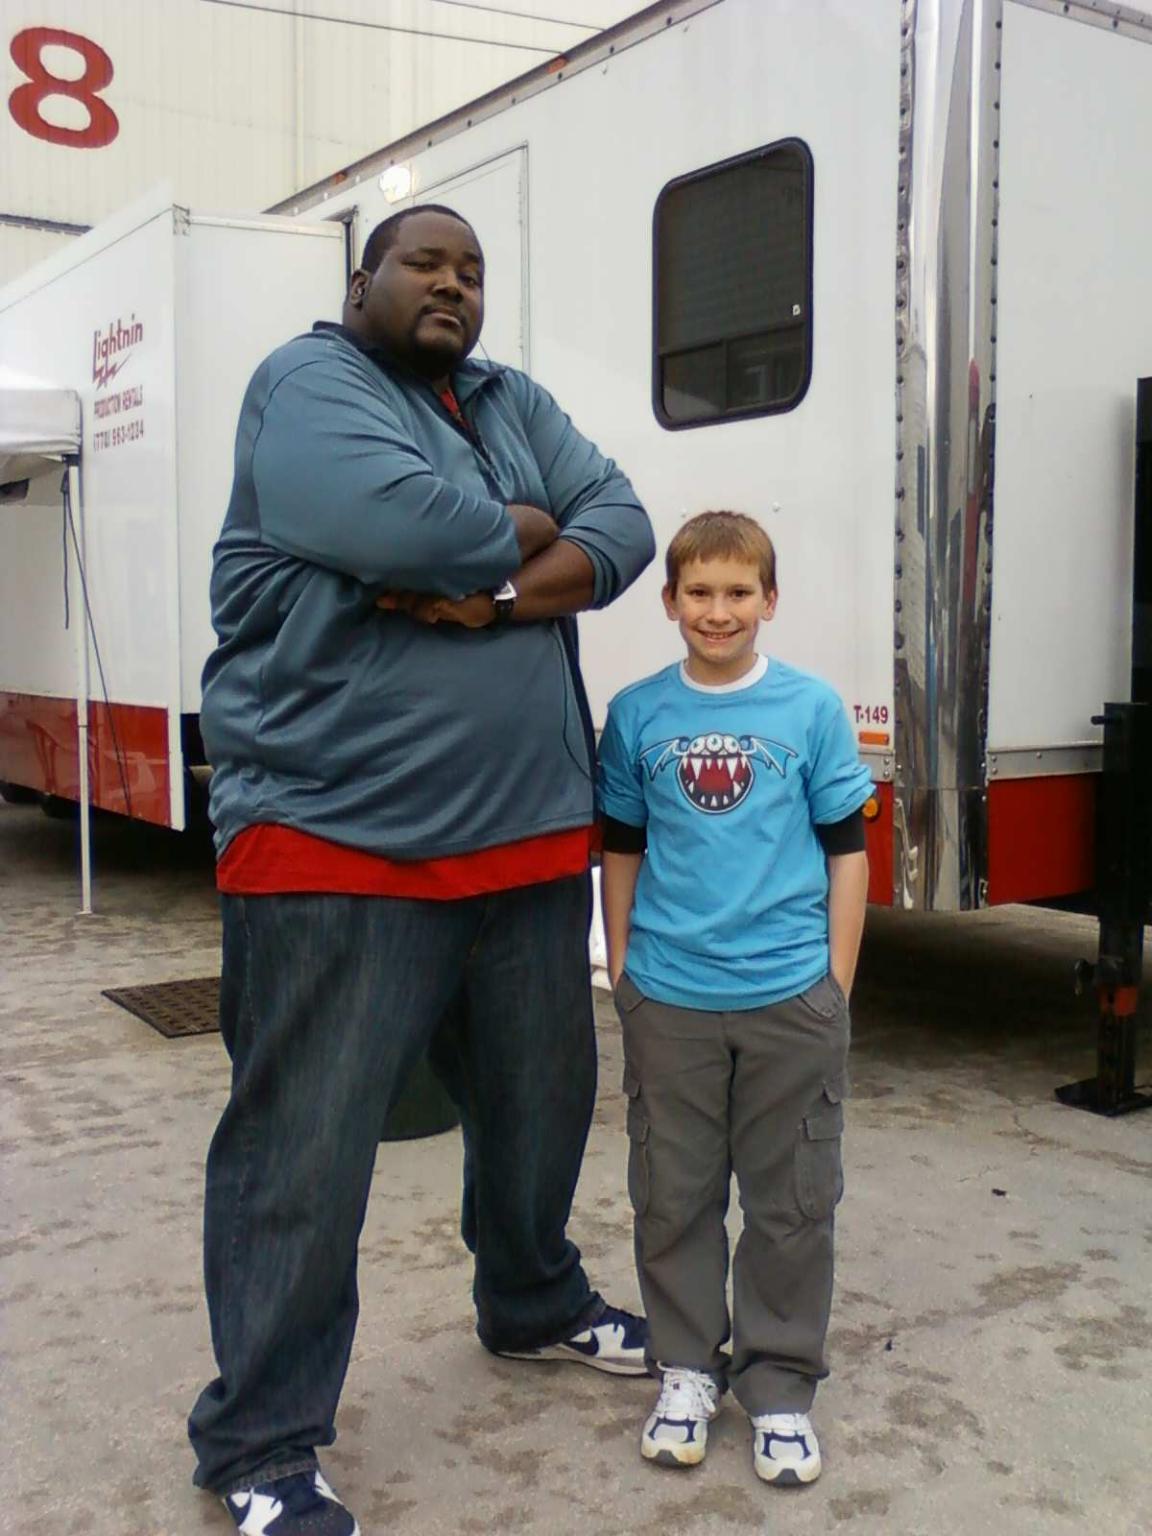 Michael & Quinton Aaron from The Blindside